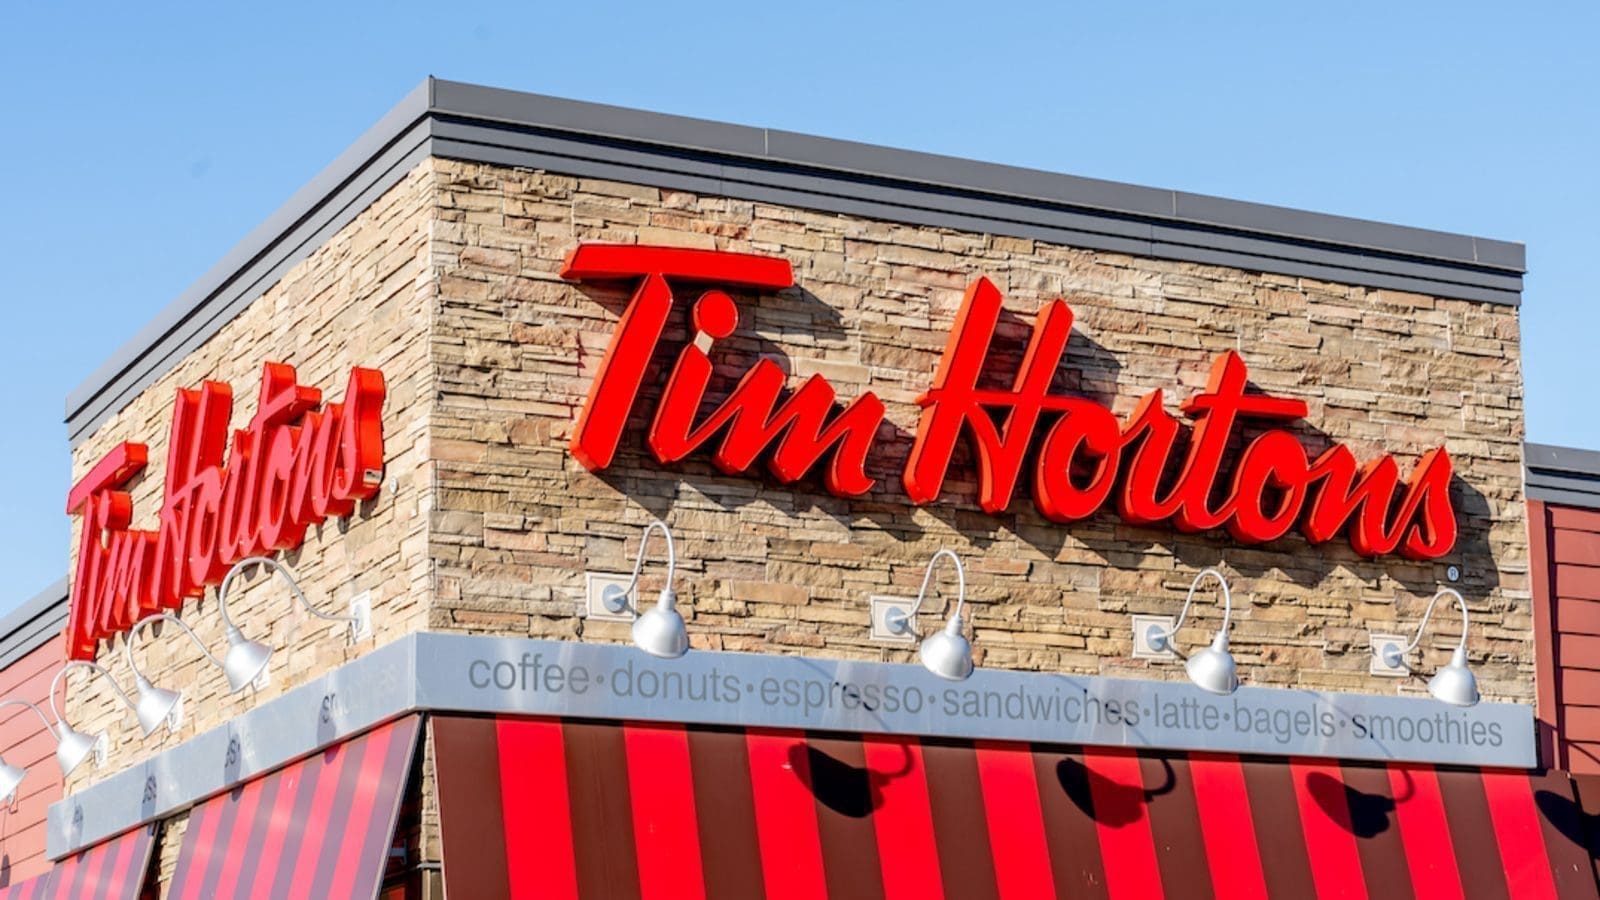 Tim Hortons plans to expand outlets in India to 120 stores in the next 3years